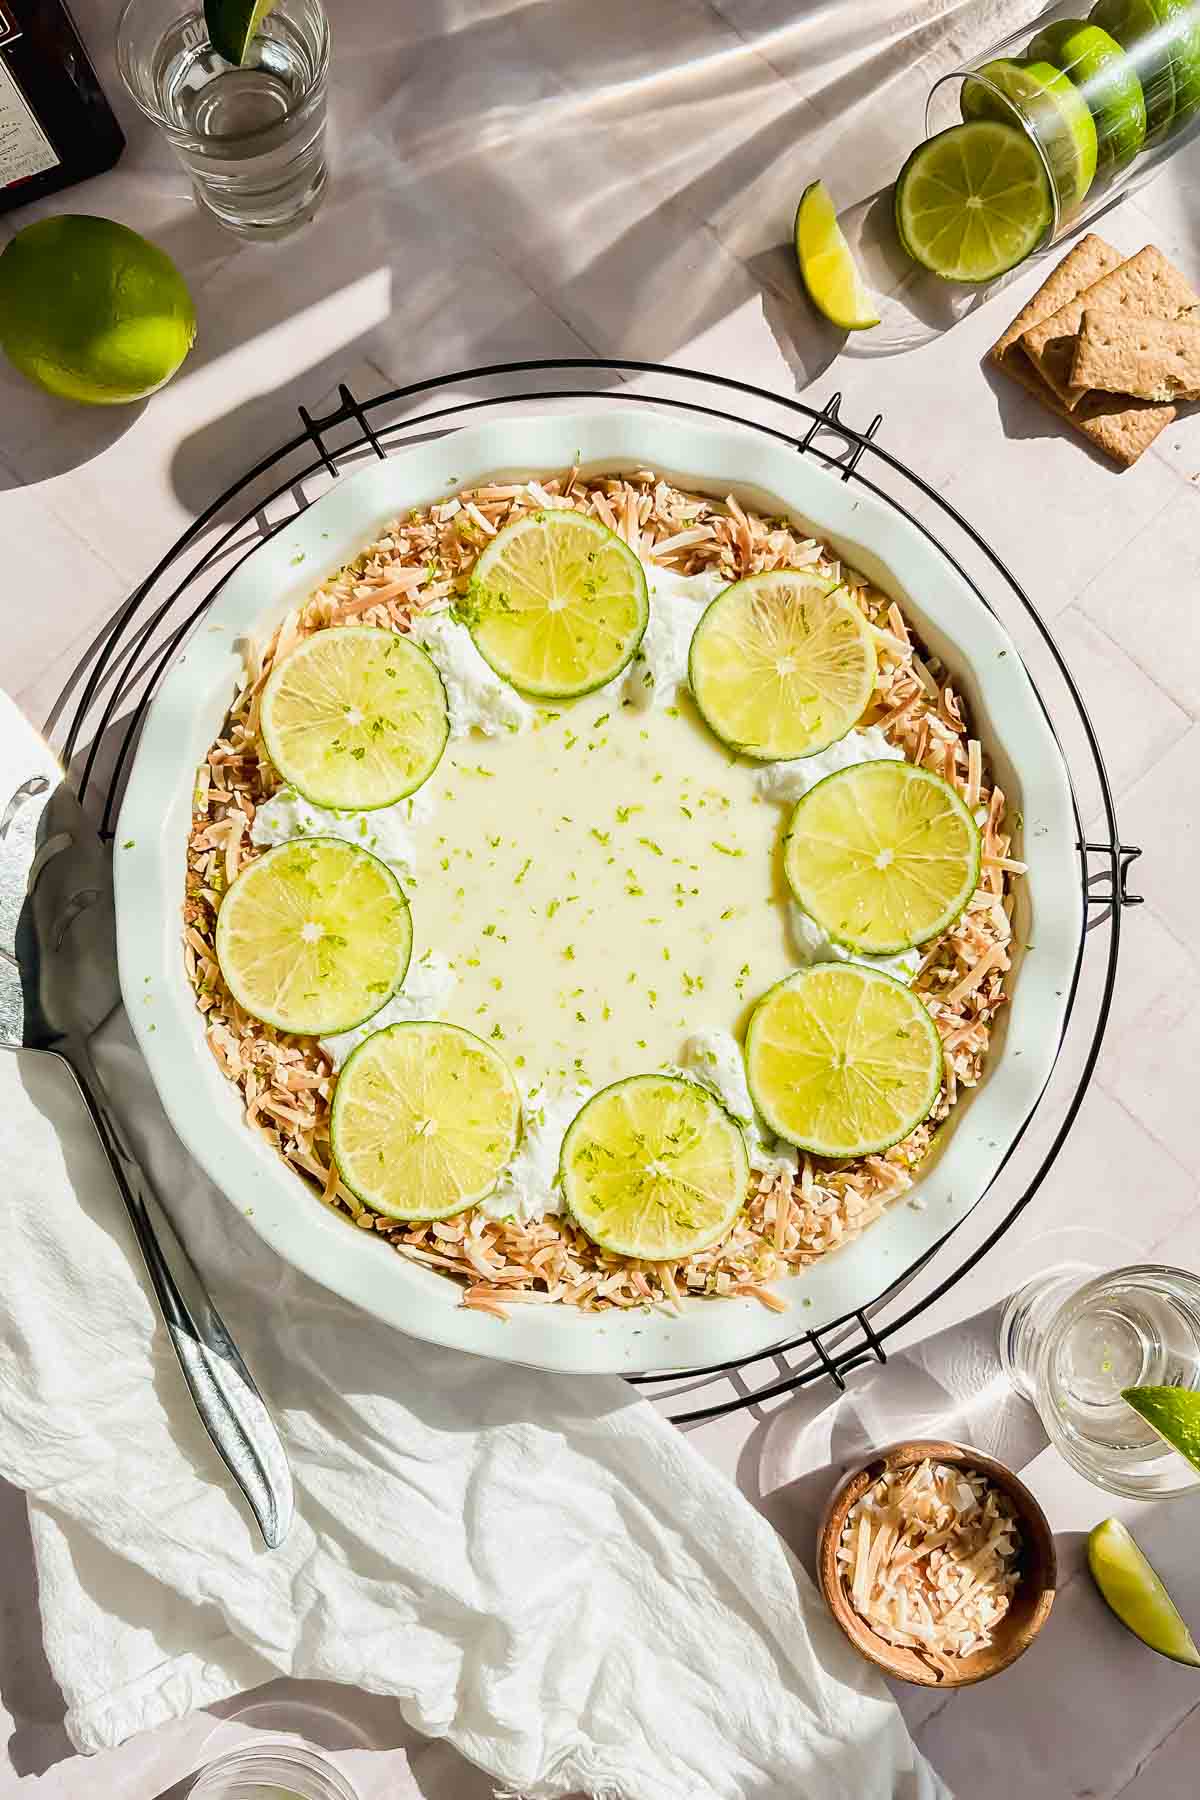 tequila key lime pie garnished with toasted coconut and lime slices in white baking dish.